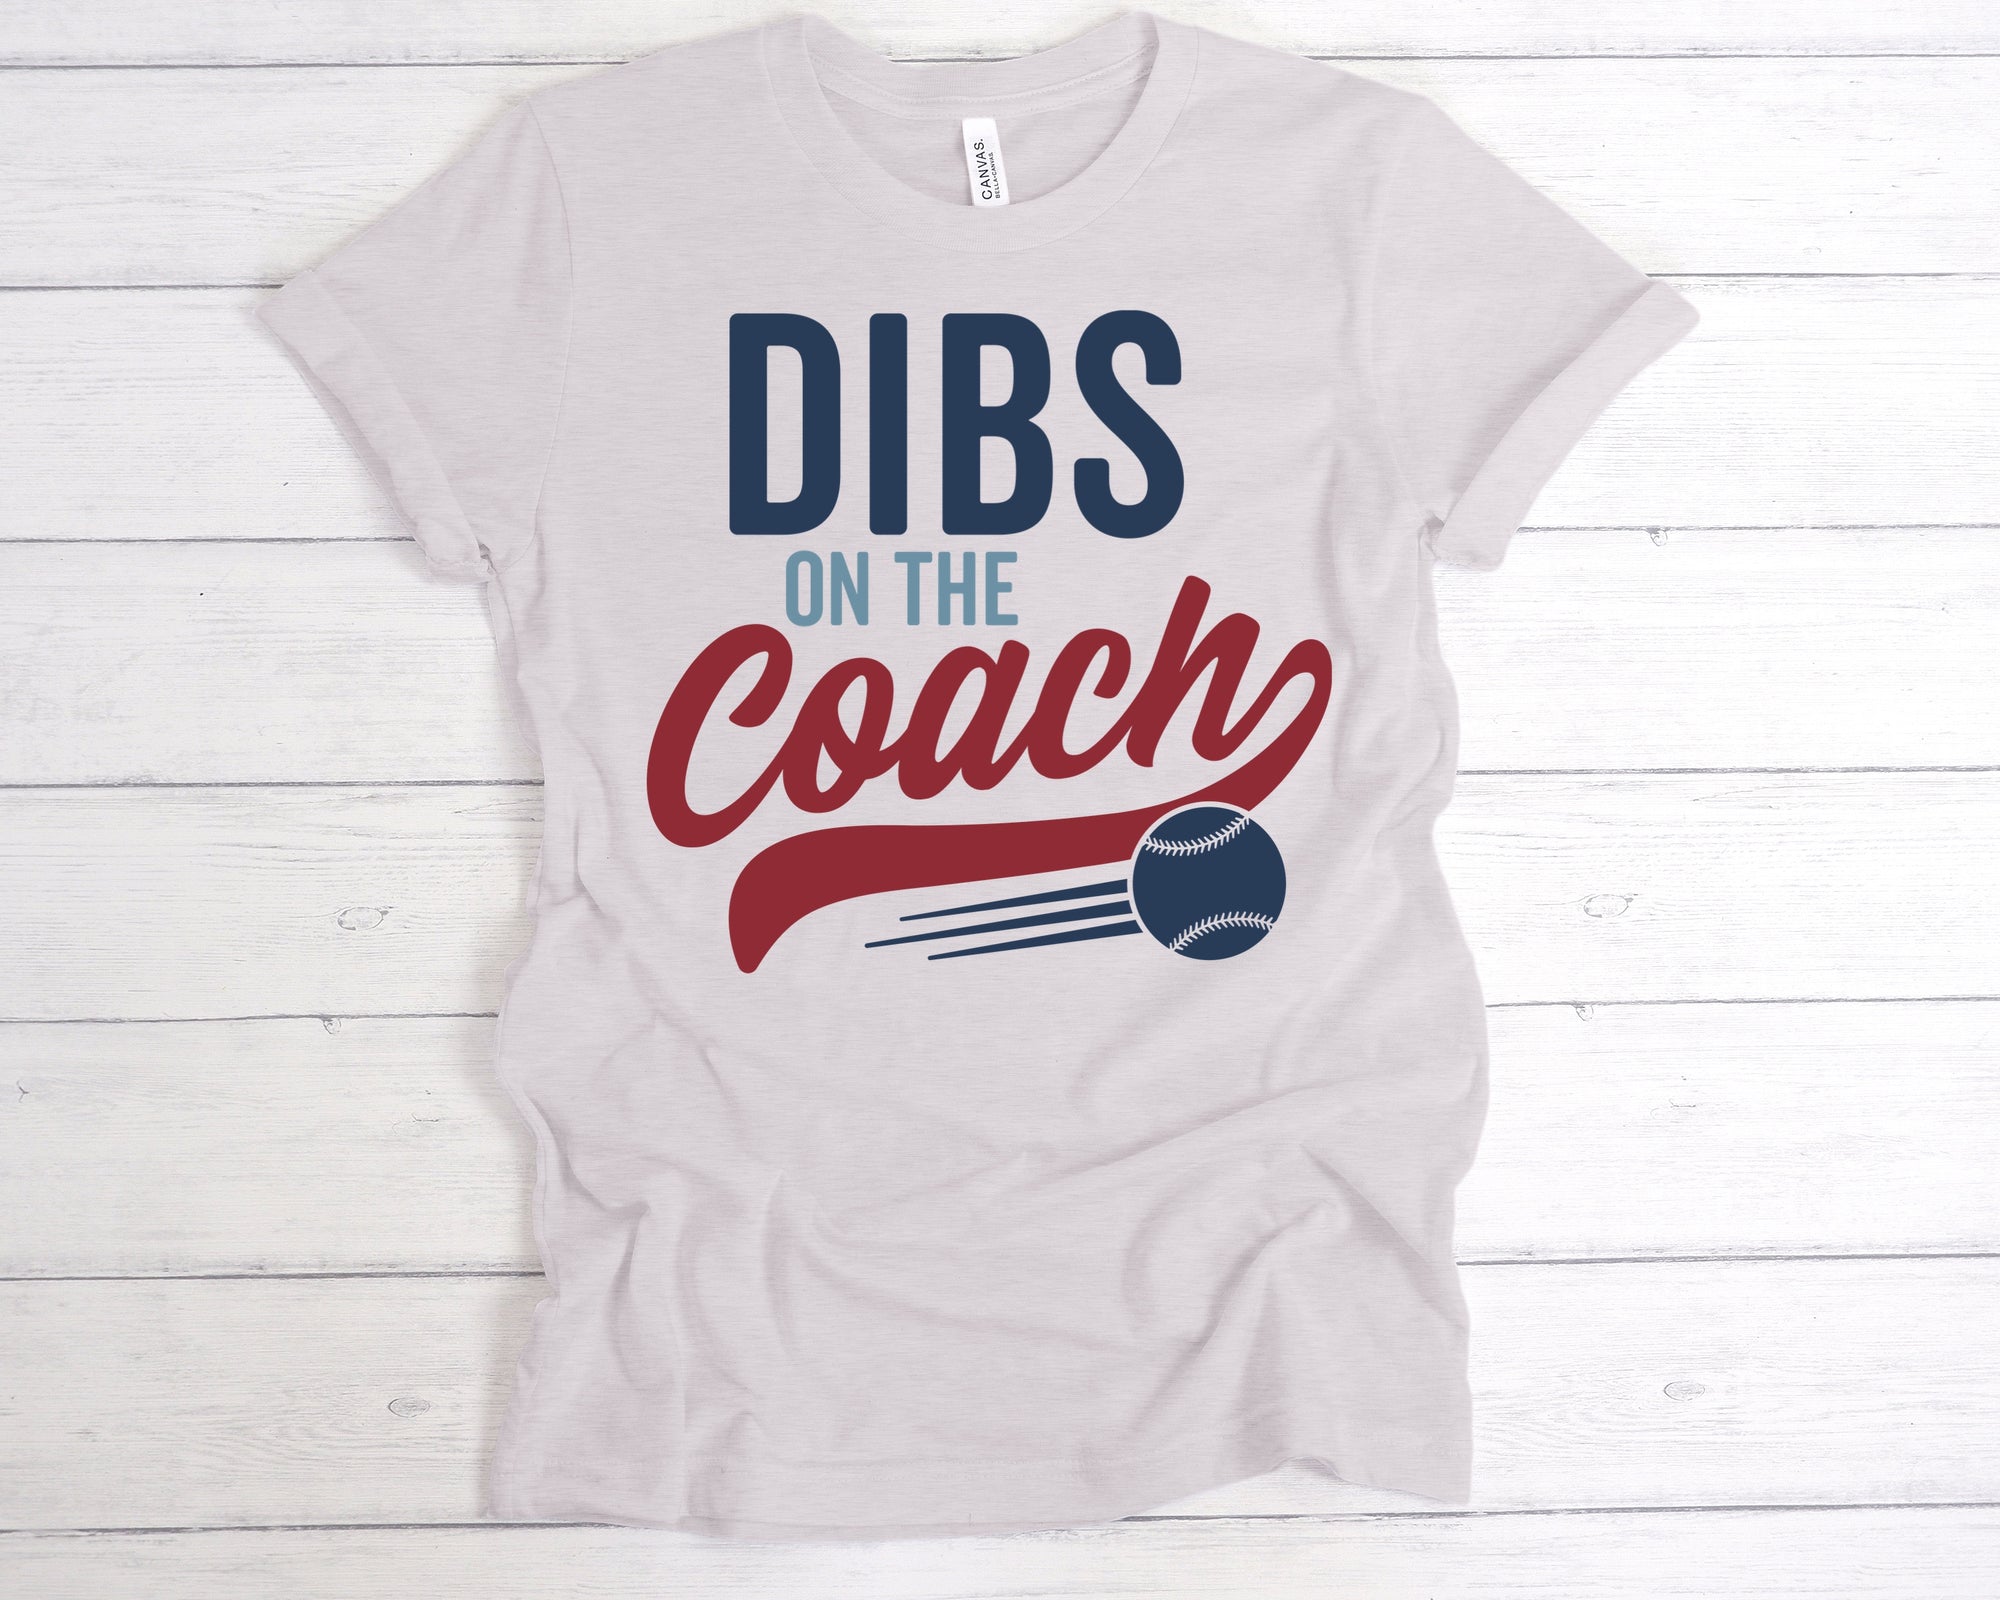 DIBS ON THE COACH ADULT UNISEX T-SHIRT - Baby Bums Clothing 